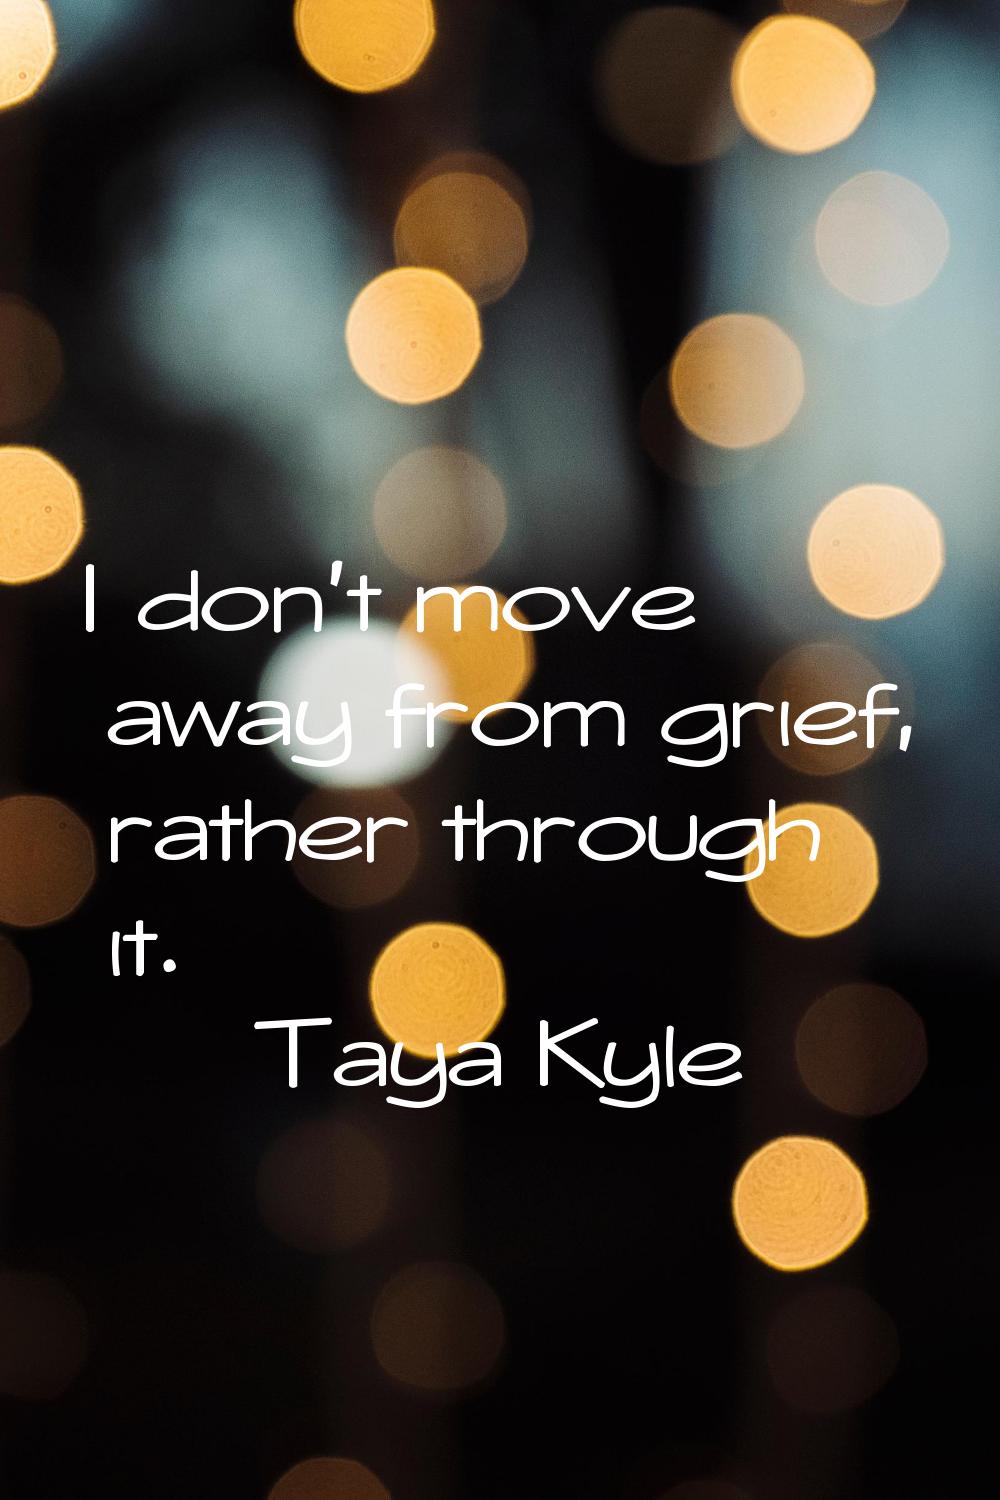 I don't move away from grief, rather through it.